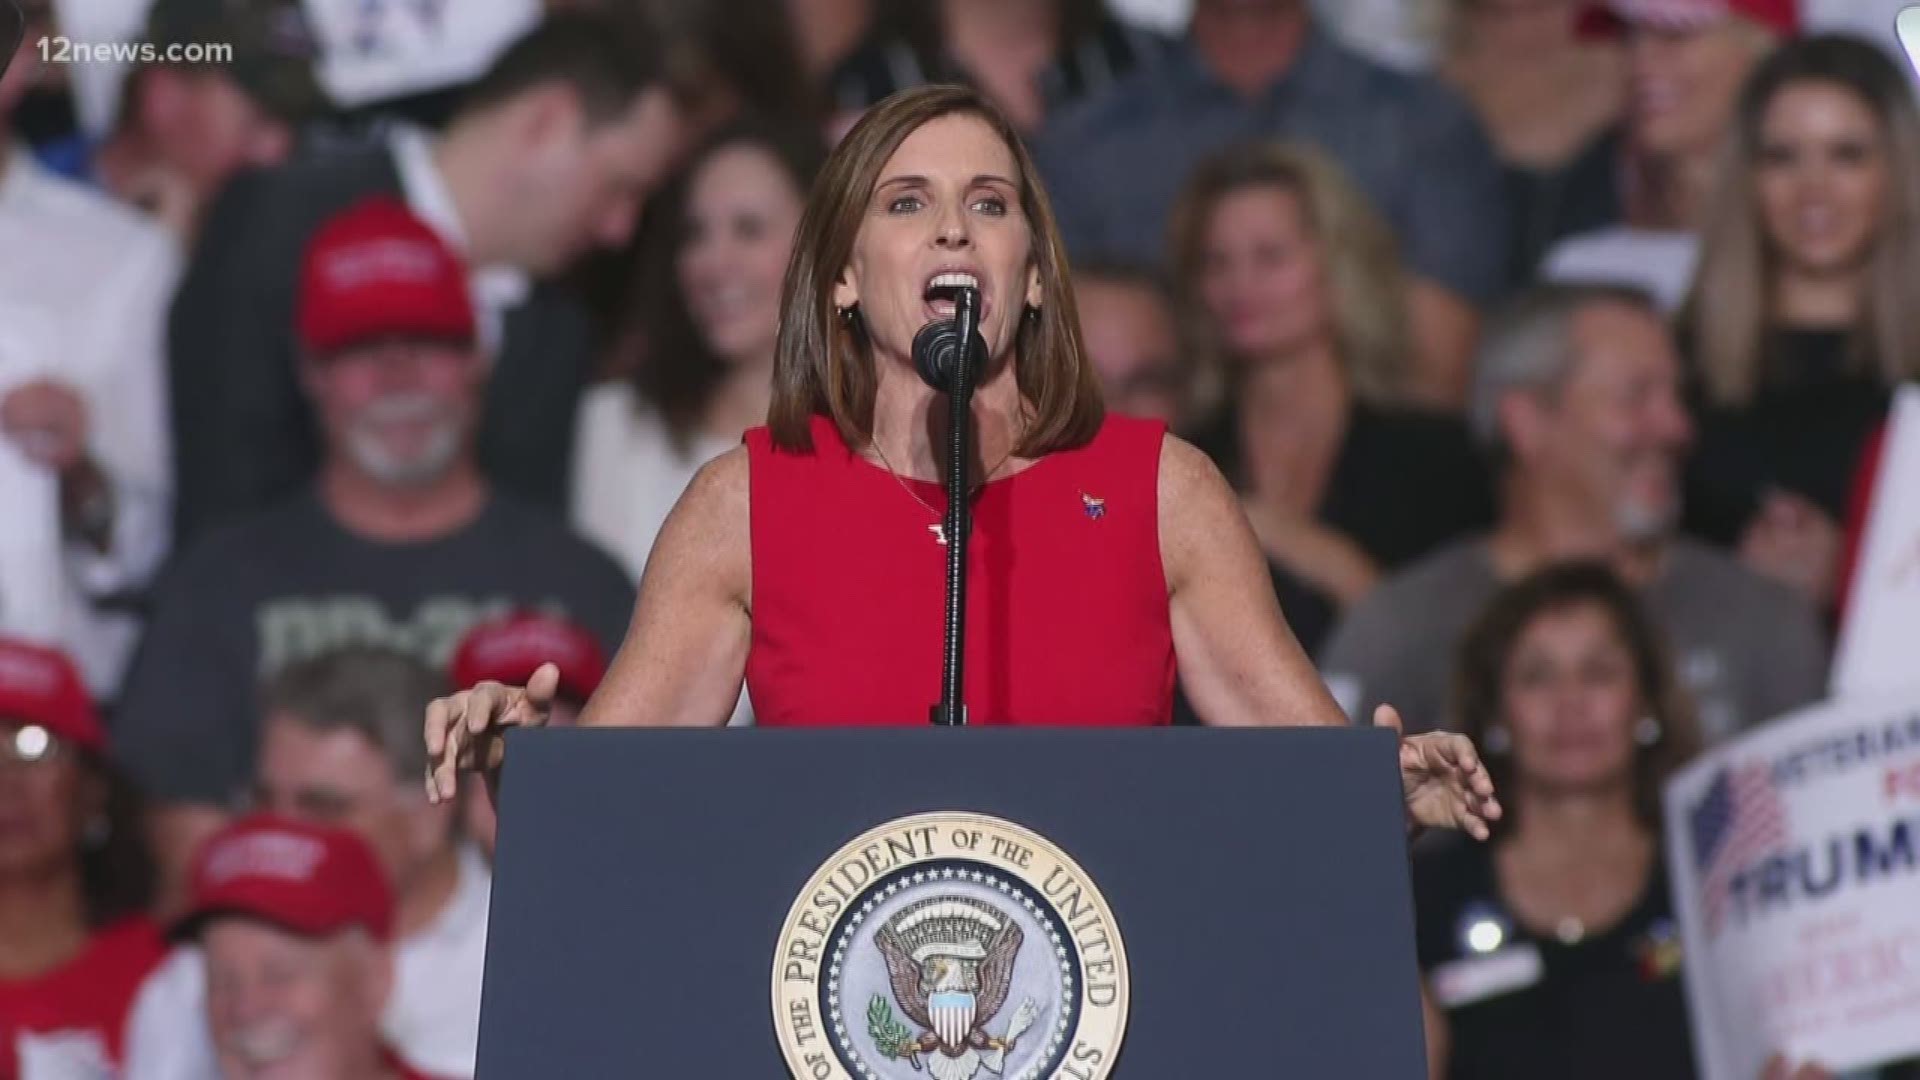 Martha McSally has been appointed to former Senator John McCain's seat. We verify what McSally will have to do in the Senate to keep her seat when she has to run again in two years.